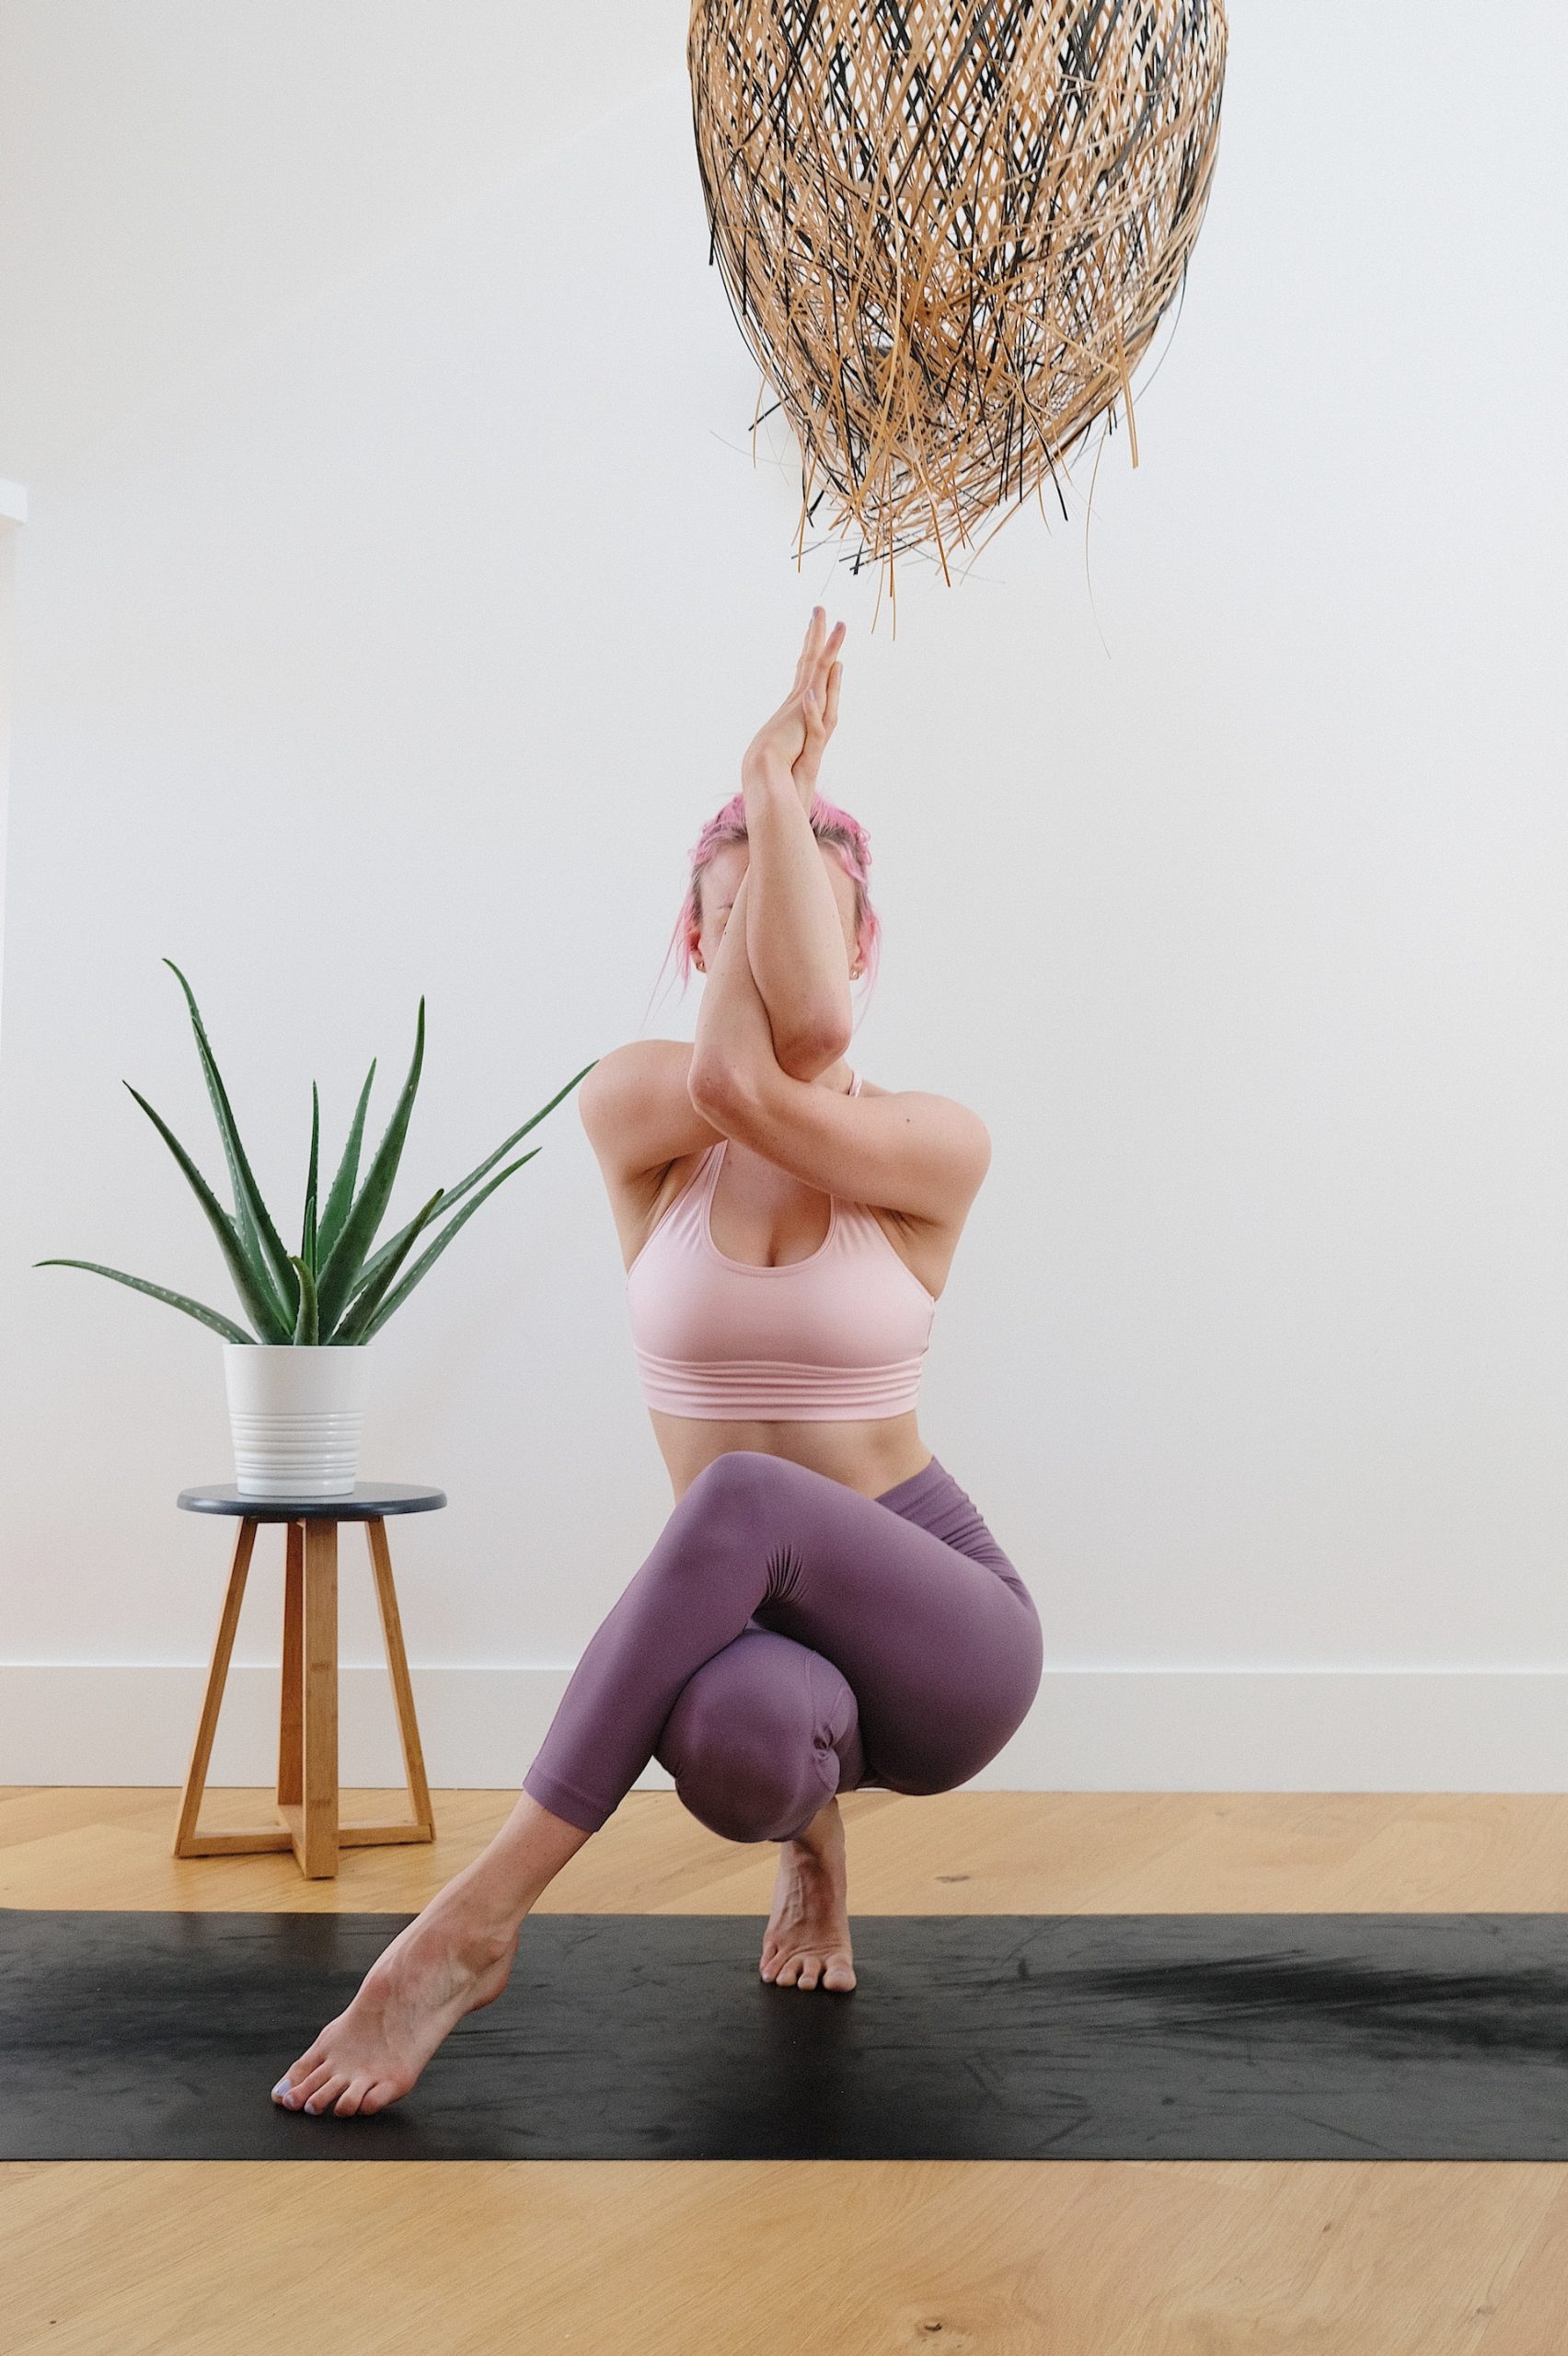 the image shows a woman doing a "cow face" yoga pose